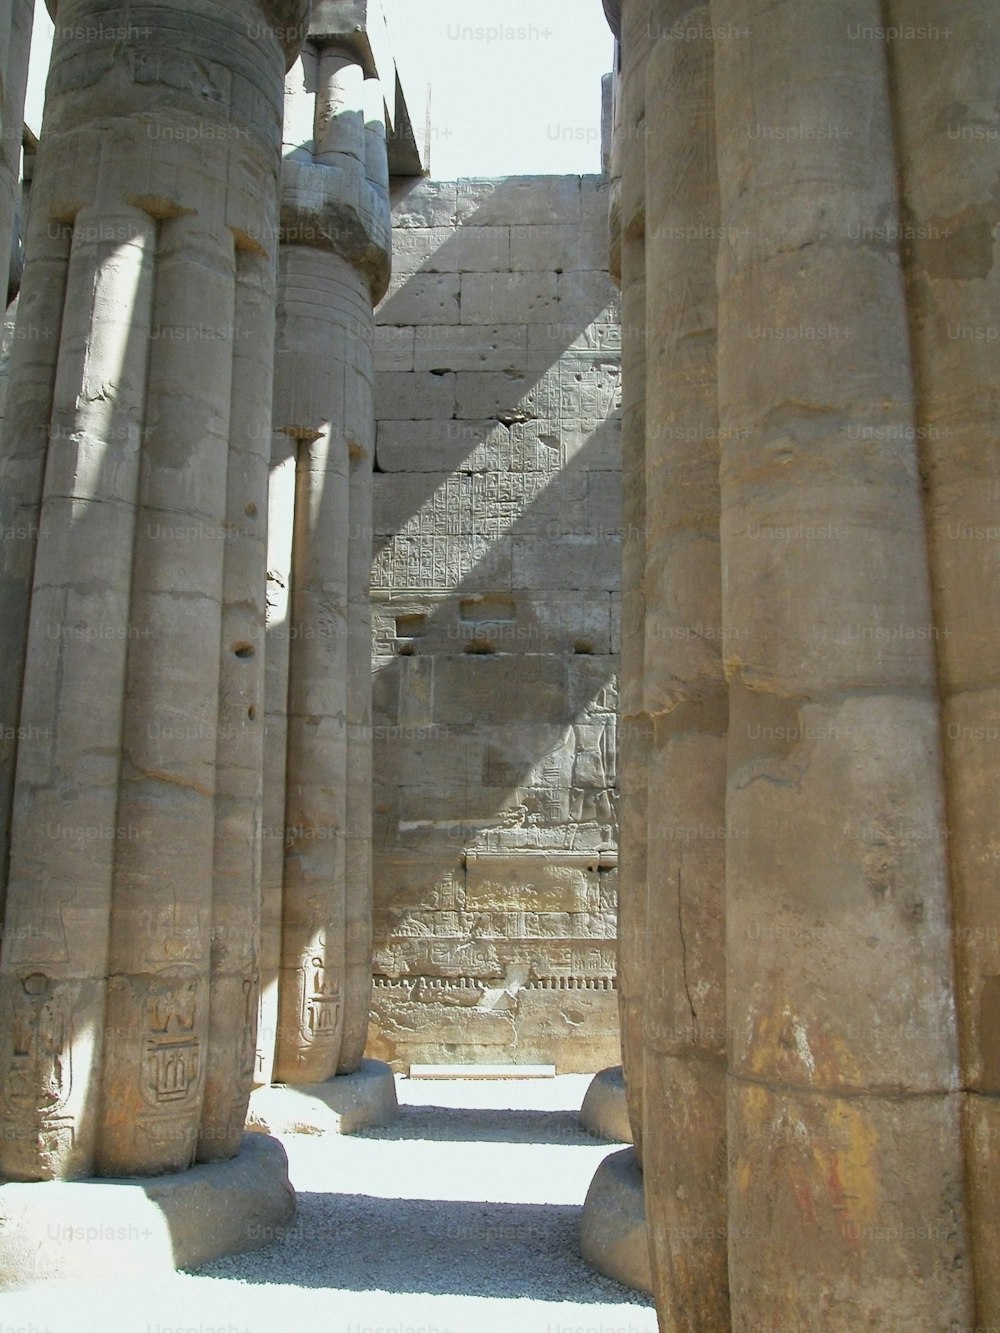 a group of large stone pillars in a building